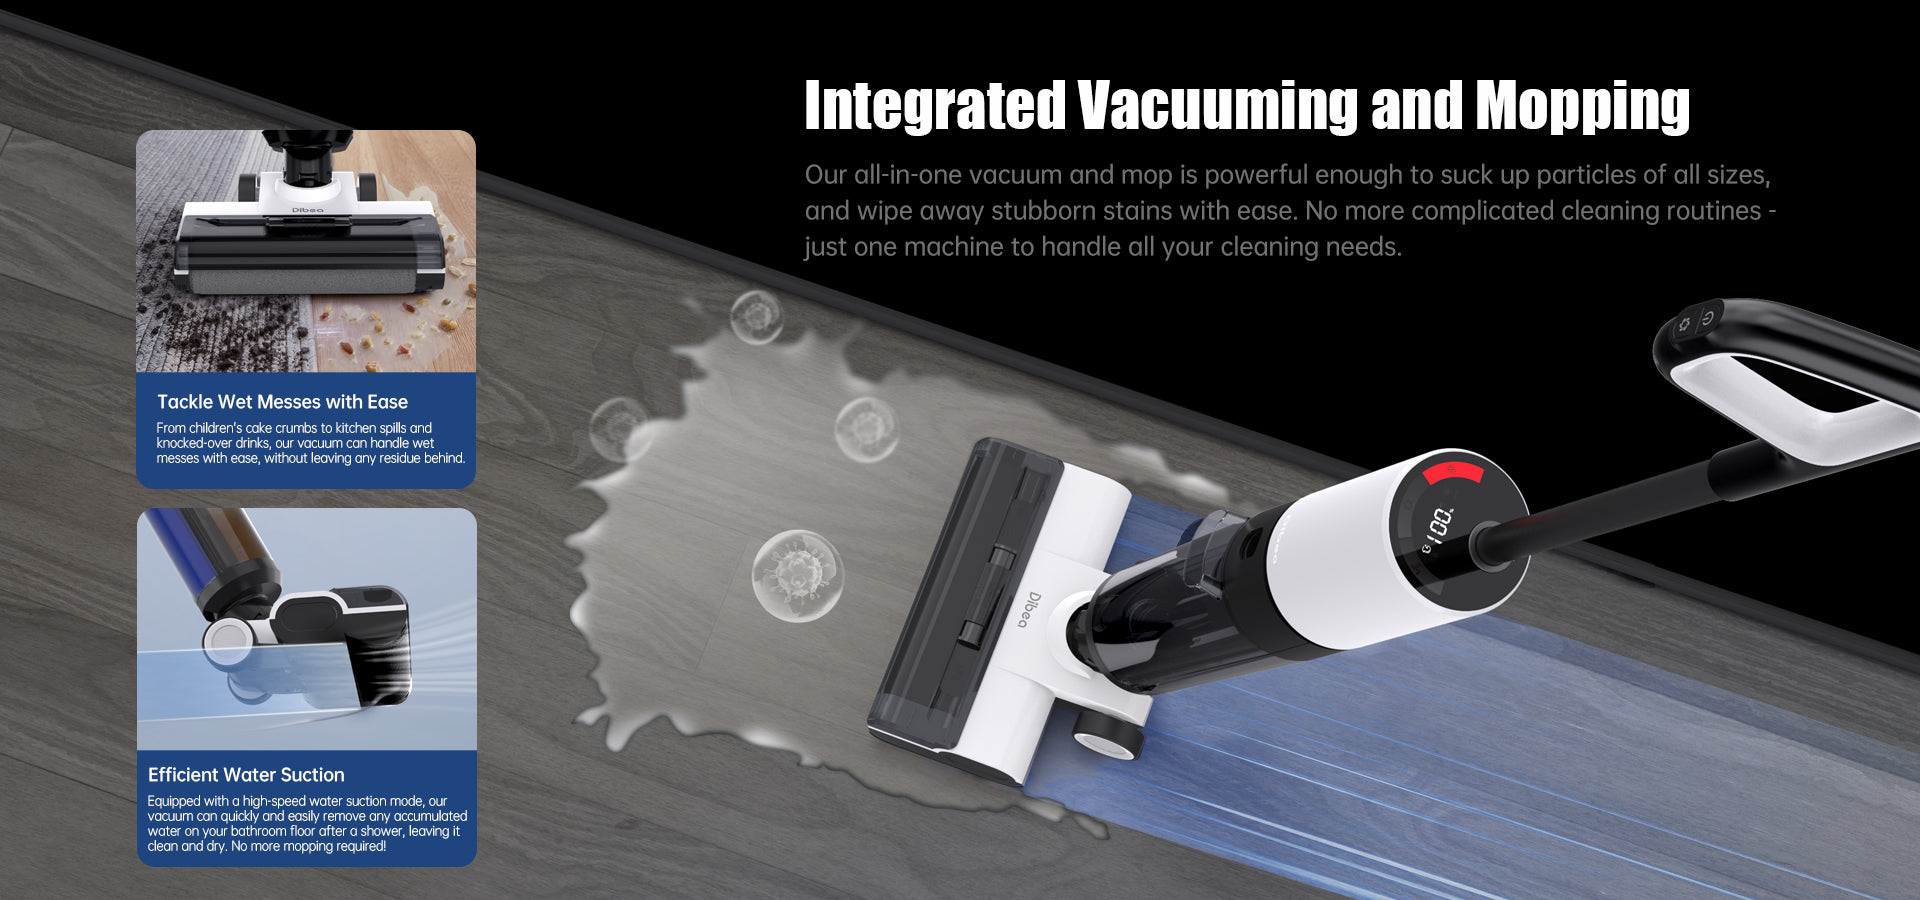 integrated_Vacuuming_and_Mopping